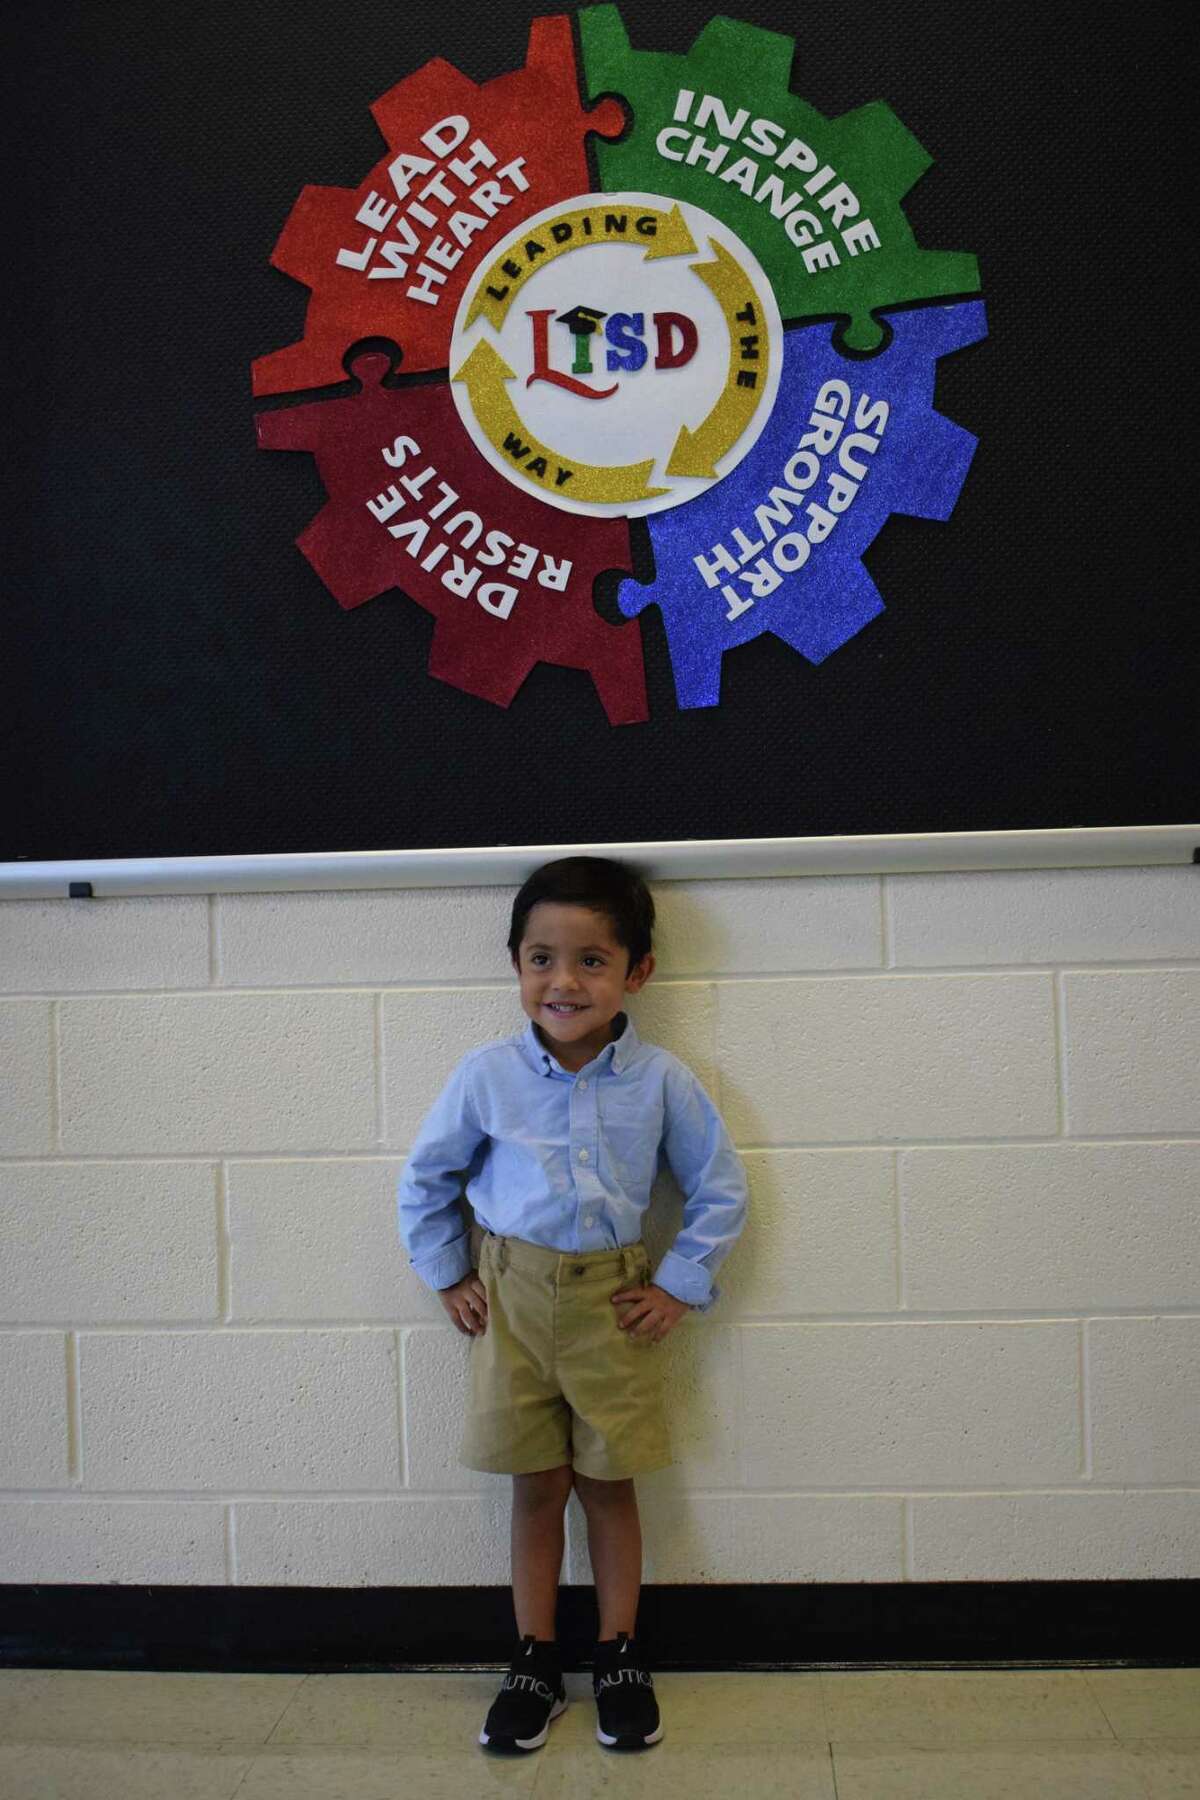 Pictured is Luca, a pre-K3 student excited to begin his first day ever in school at MacDonnell Elementary School.